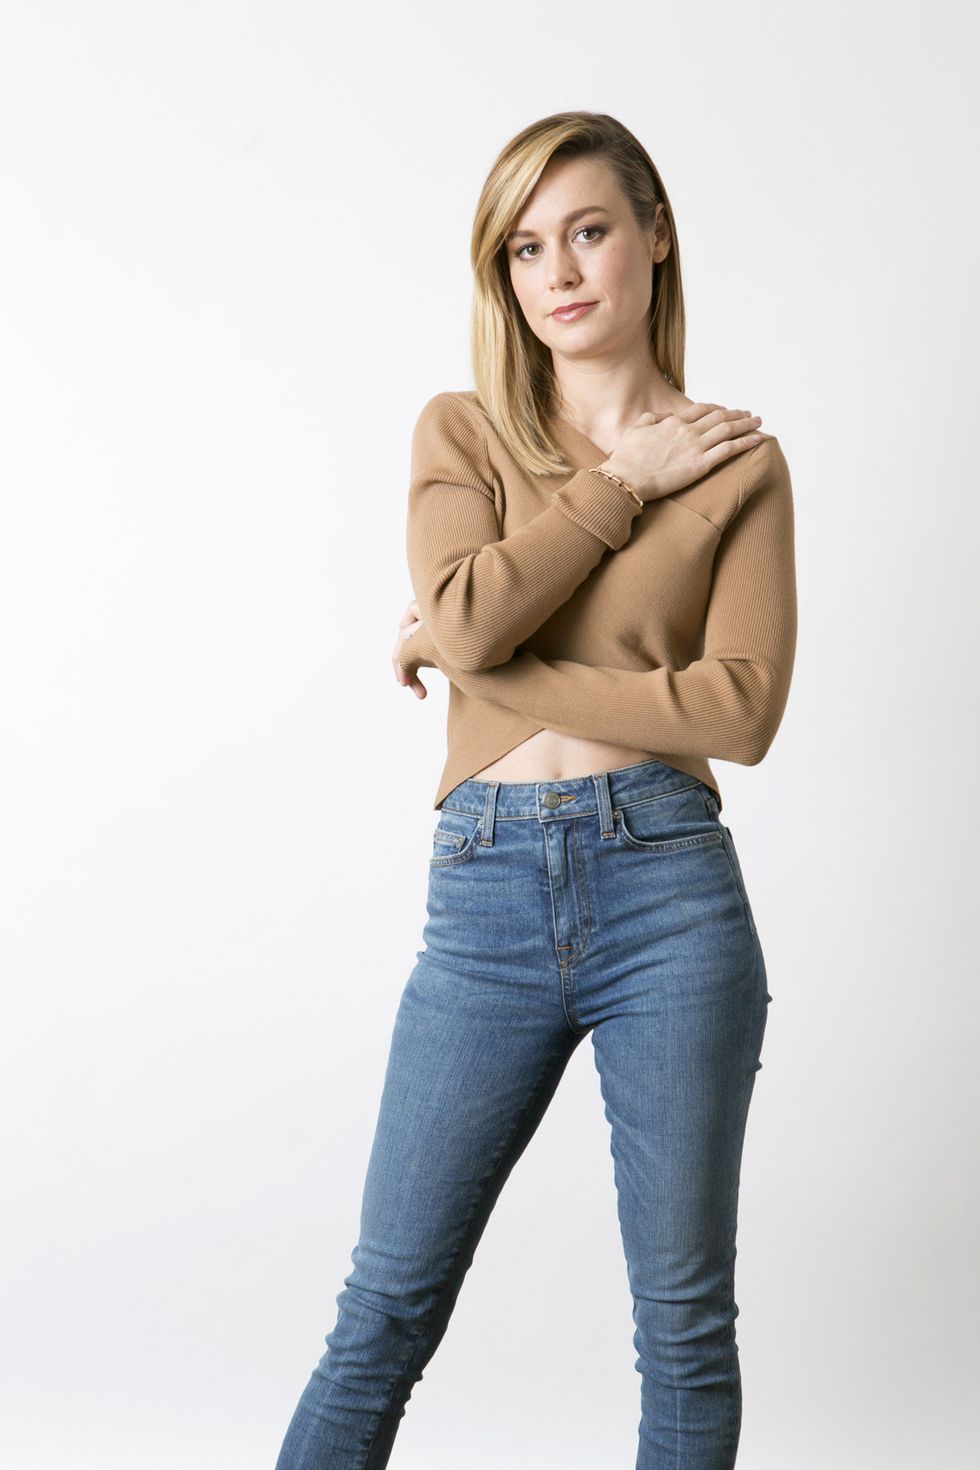 Jeans, Clothing, Shoulder, Skin, Standing, Beauty, Neck, Waist, Arm, Joint, 